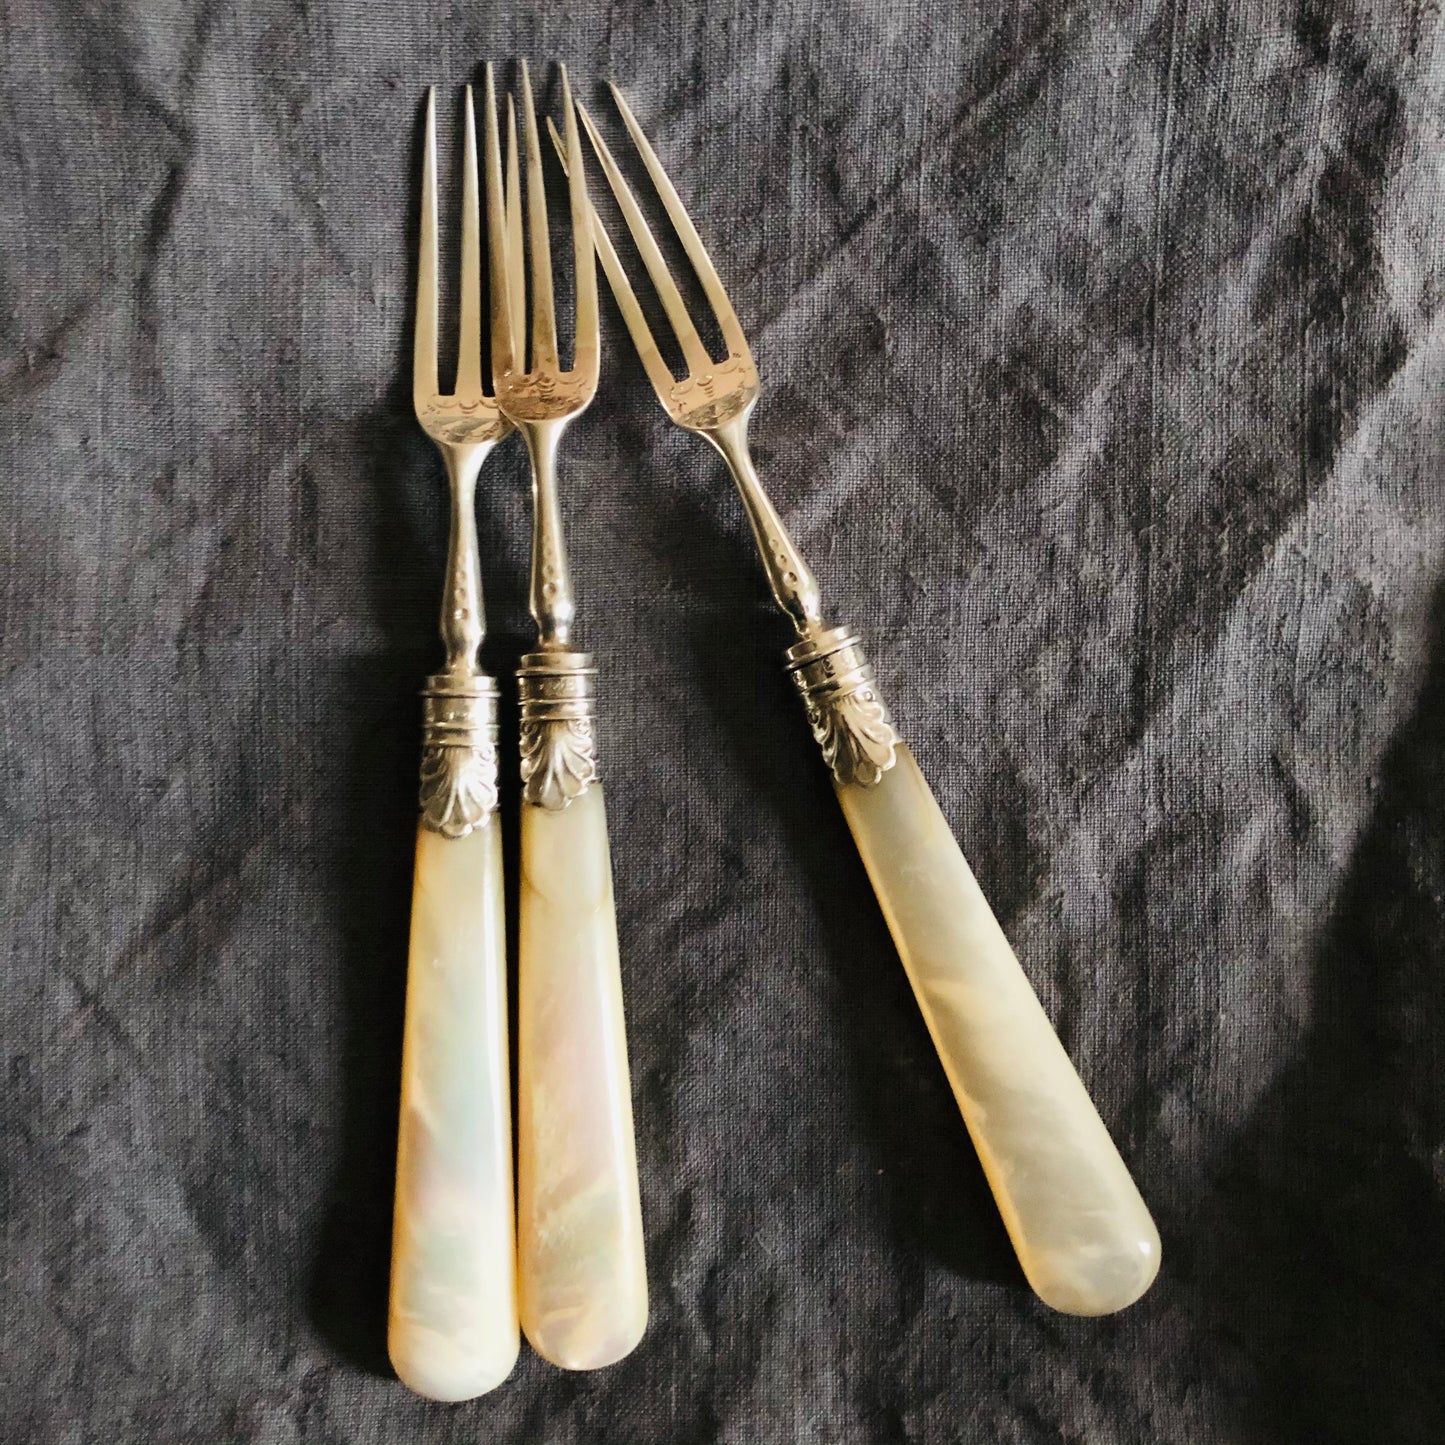 Antique Silver Mother Of Pearl Handle Forks | Cheese Board Accessory